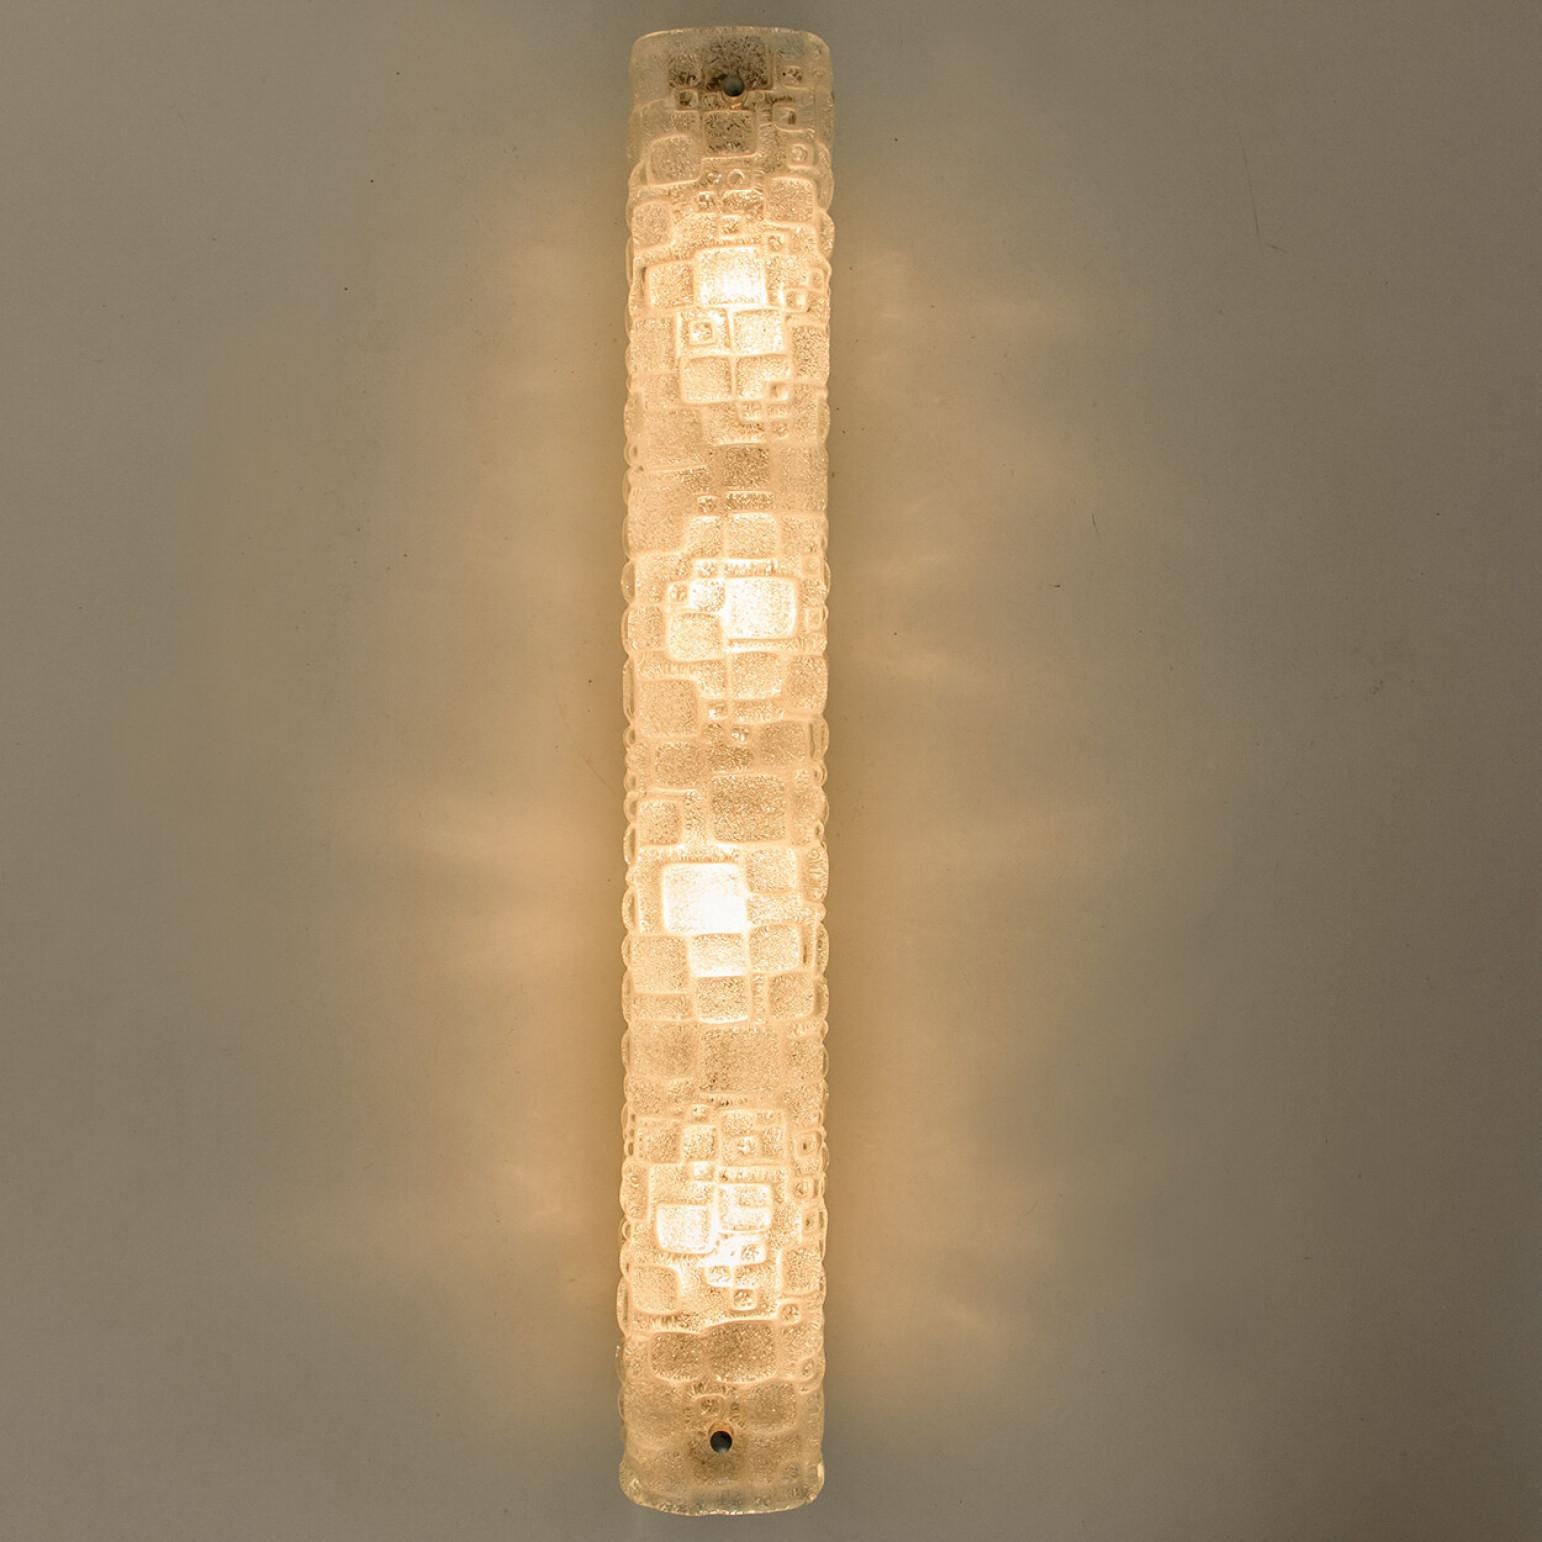 1 of 2 White Bubbled Ice Glass Wall Light Fixtures by Hillebrand, Germany, 1960s For Sale 3